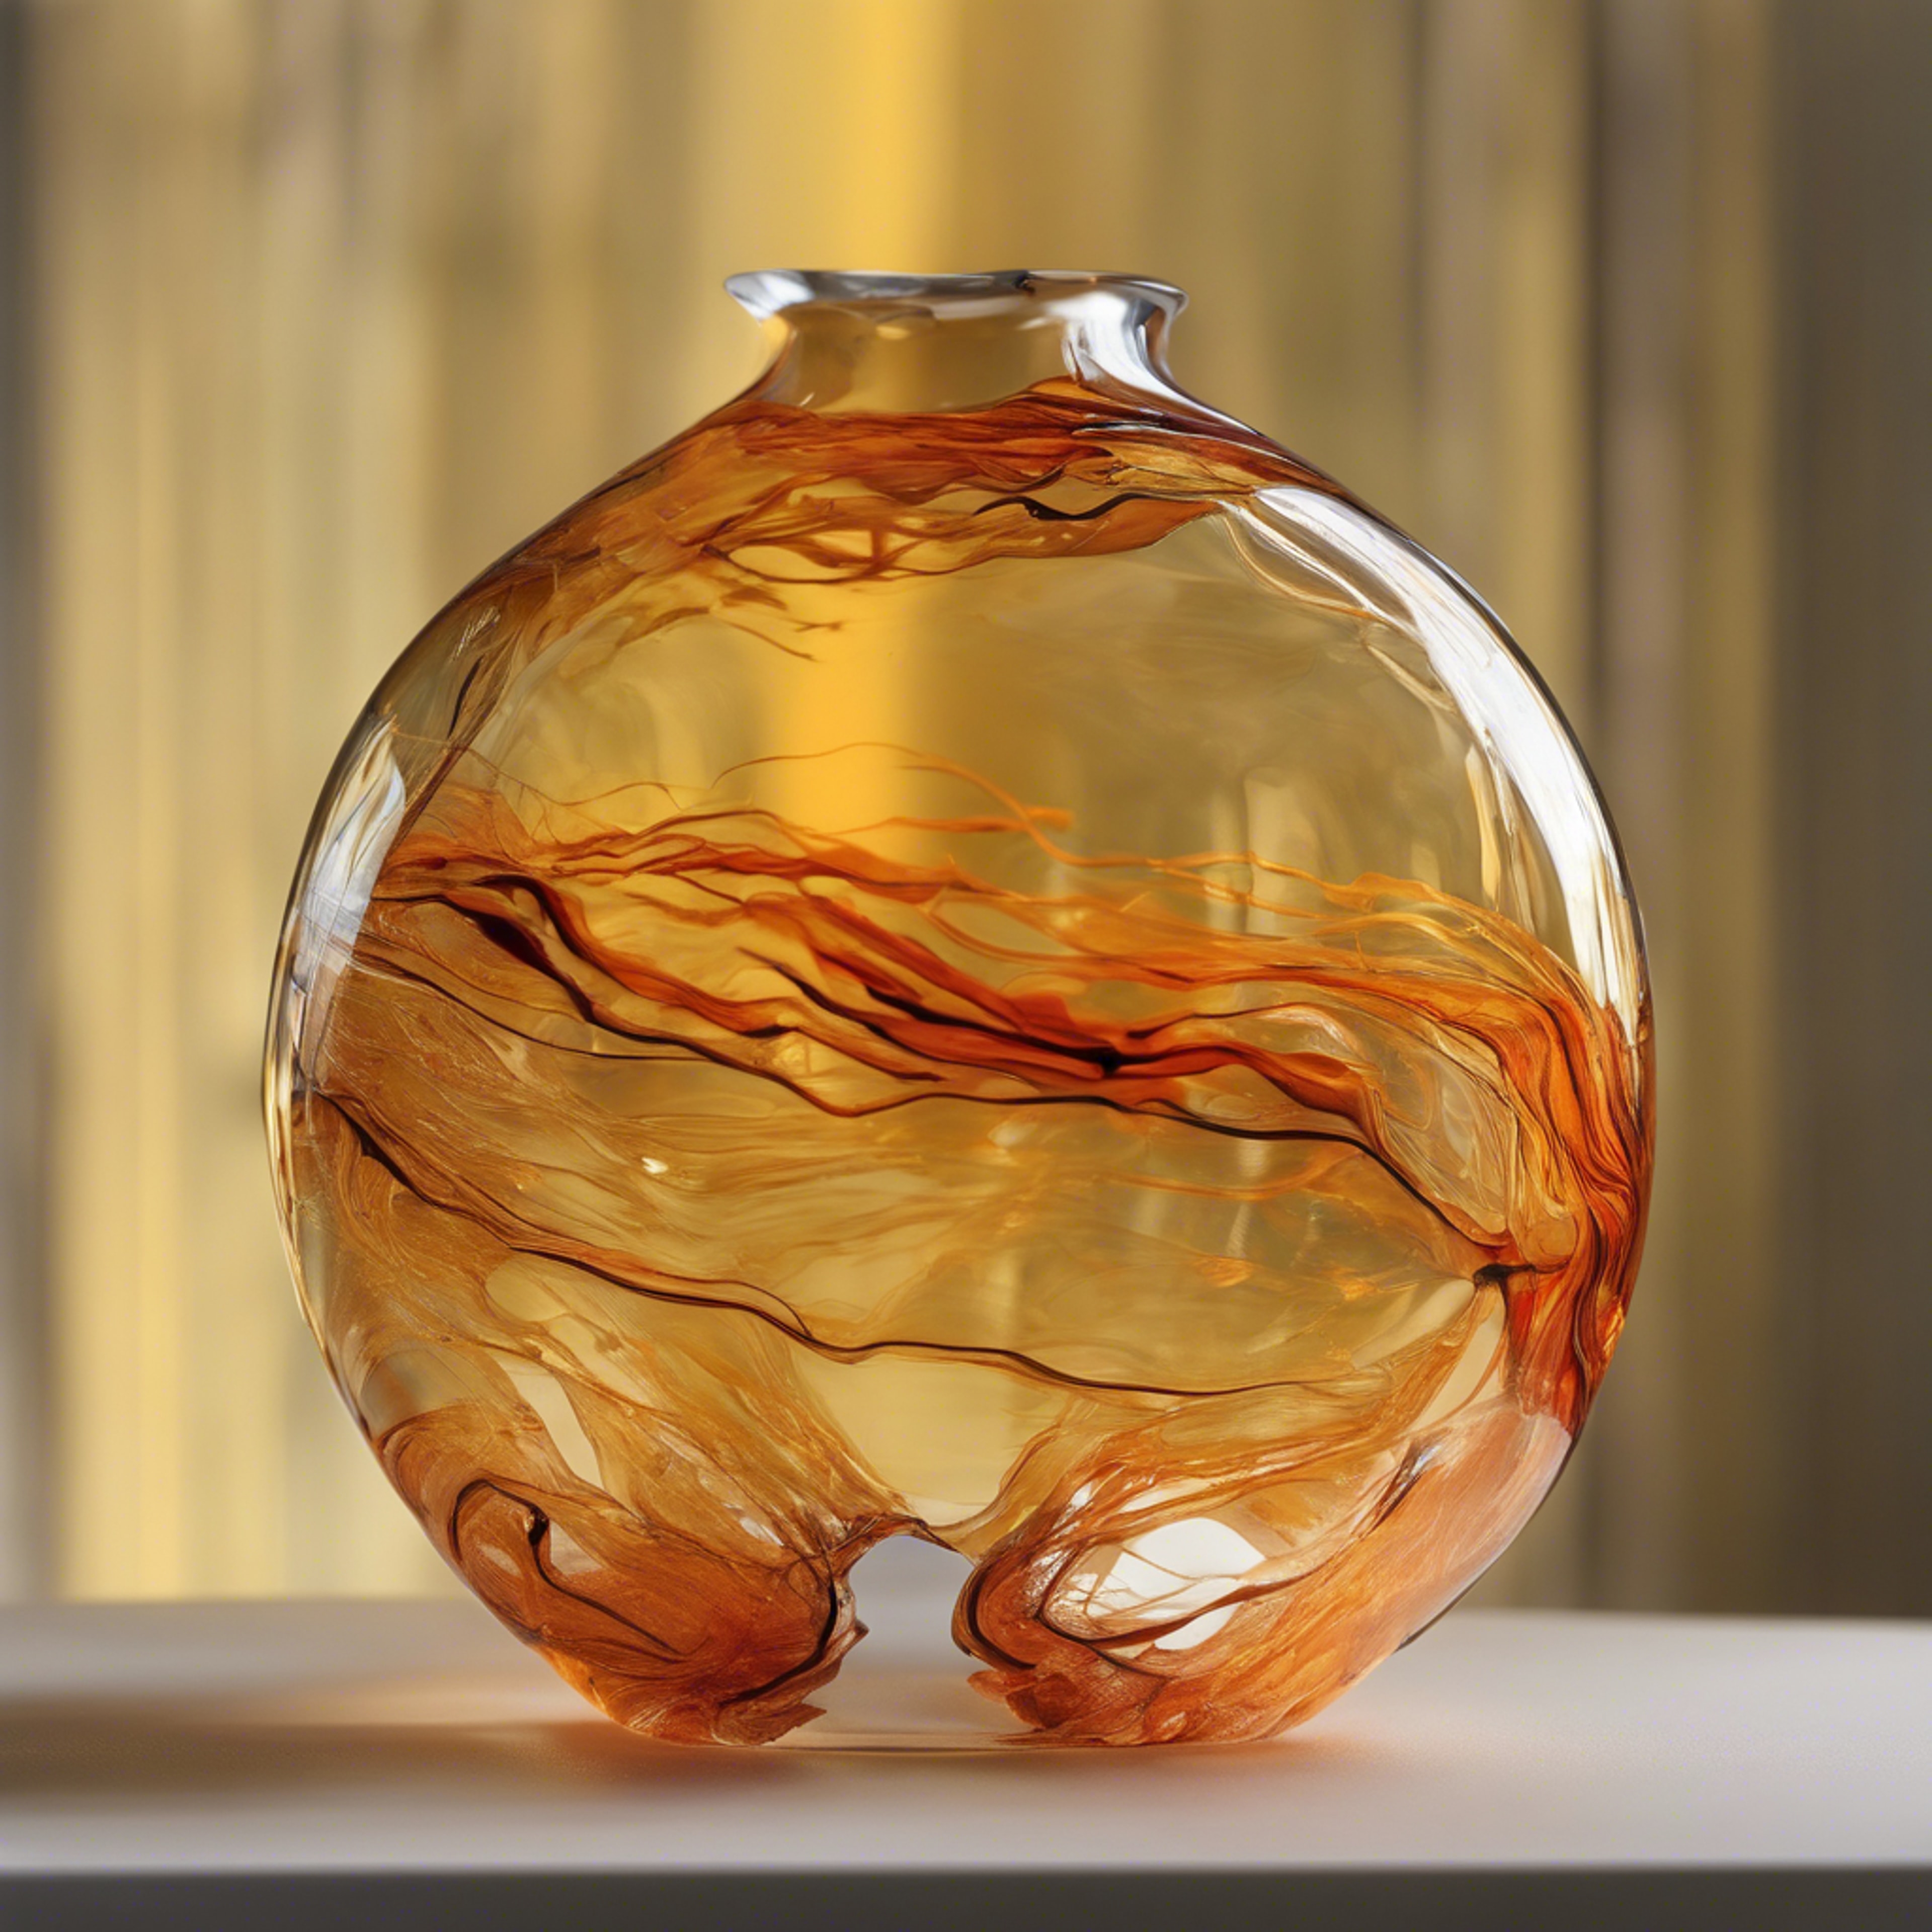 An objets d'art piece featuring glossy yellow and orange blown glass.壁紙[905544a8025d4e519dda]